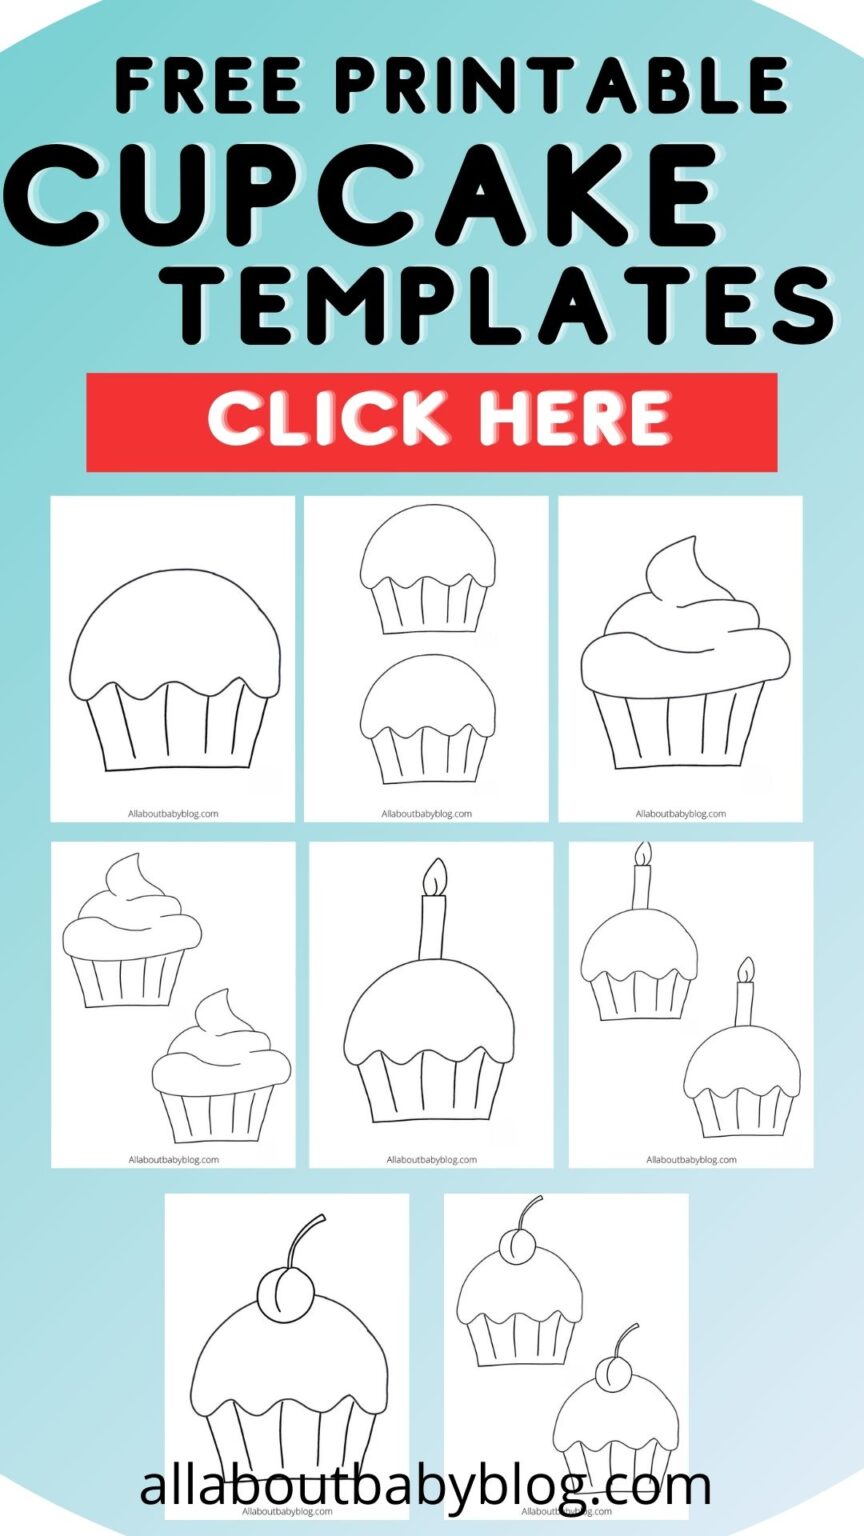 free-printable-cupcake-templates-pdf-all-about-baby-blog